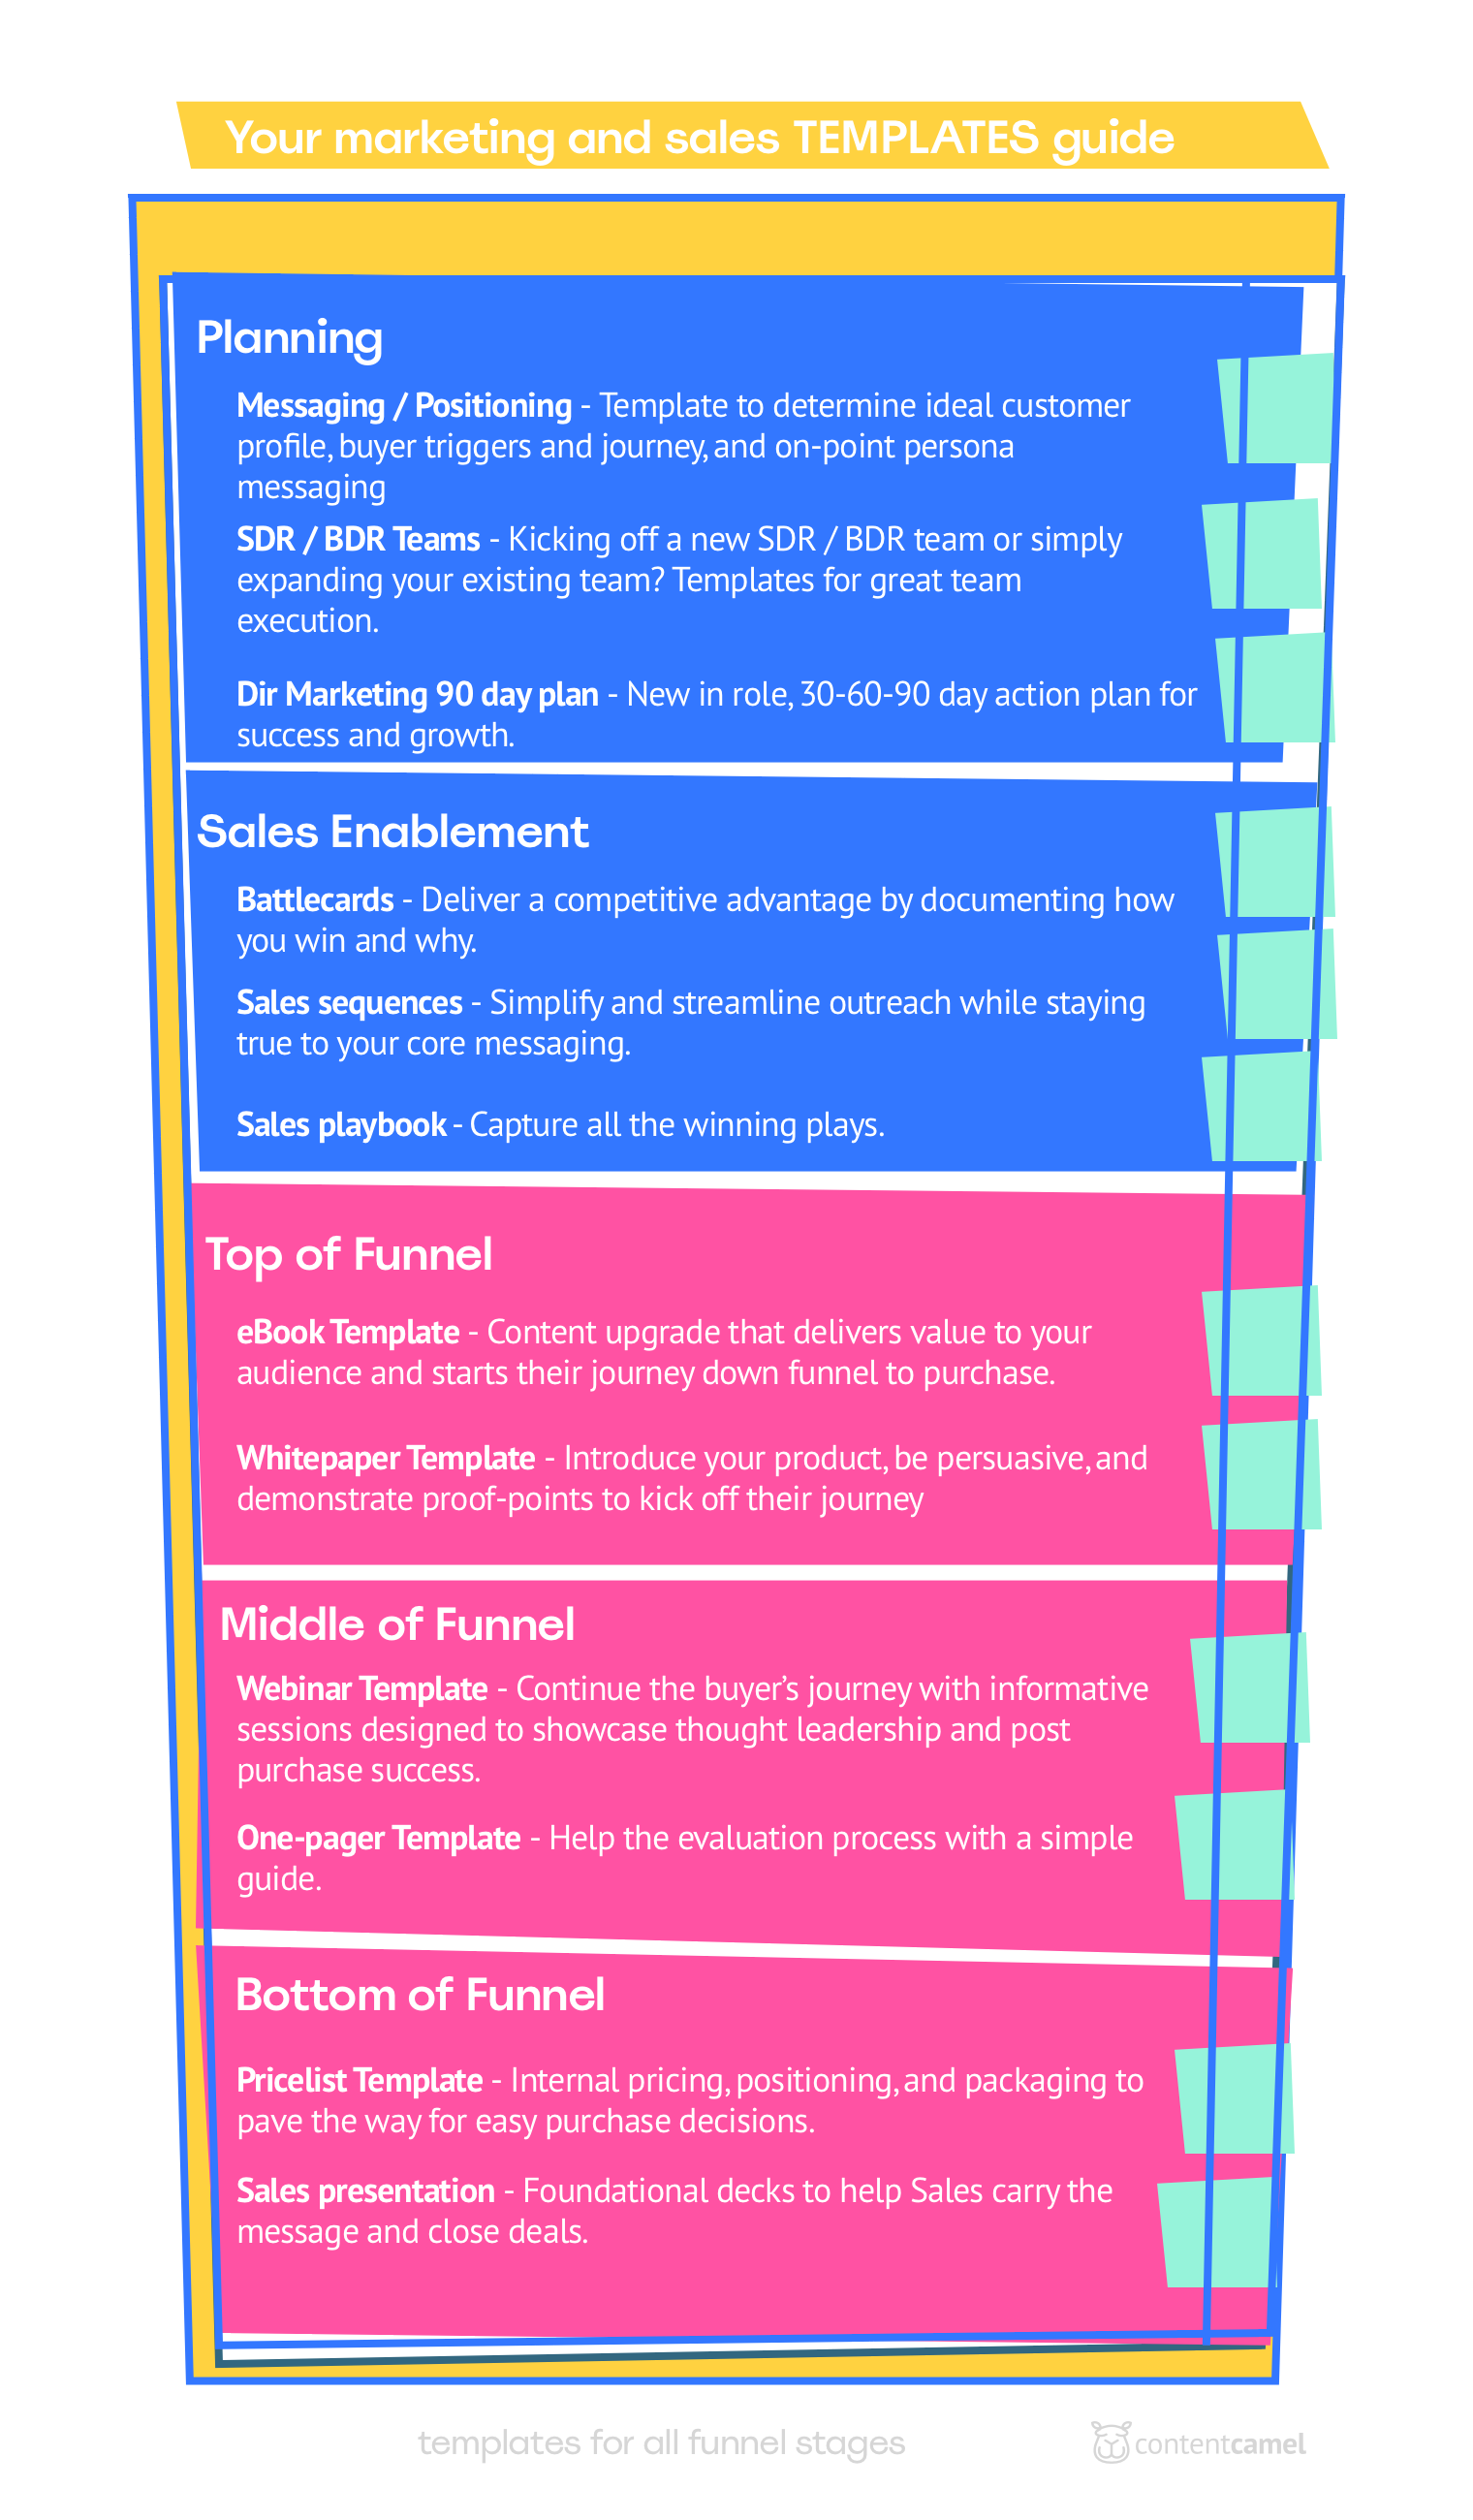 Templates by funnel stage